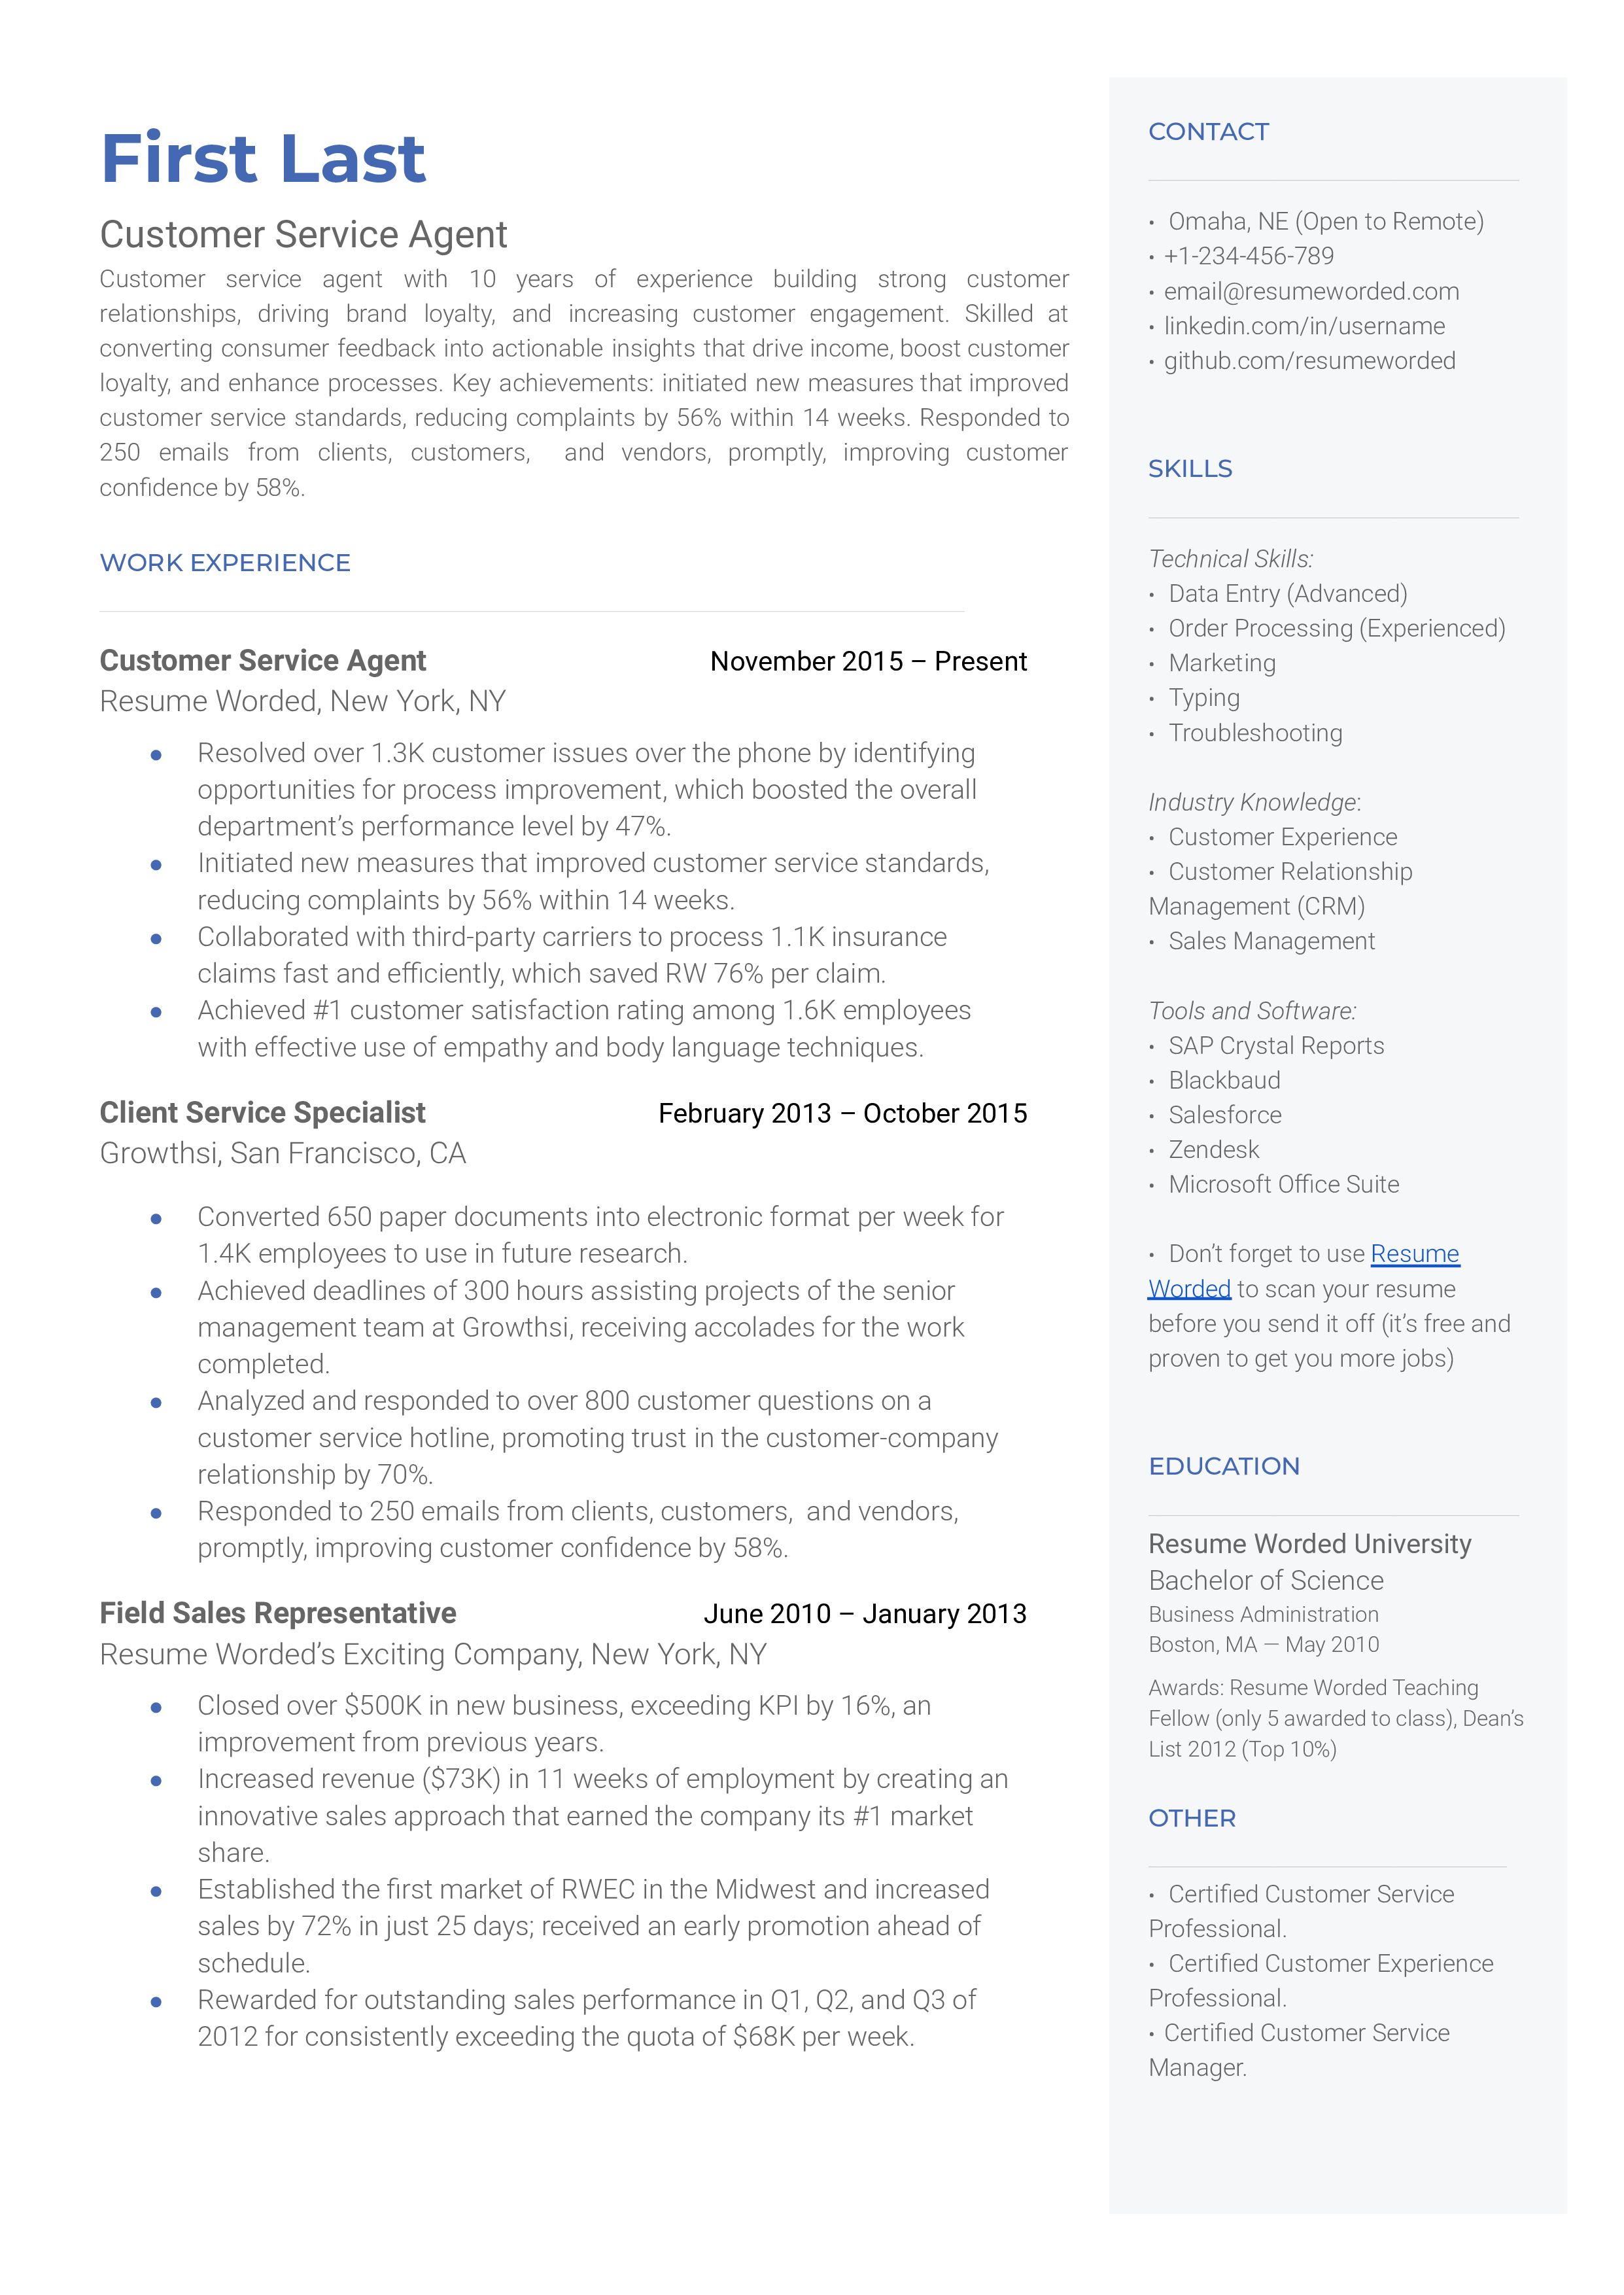 A customer service agent resume sample that highlights the applicant’s experience and workload capabilities.